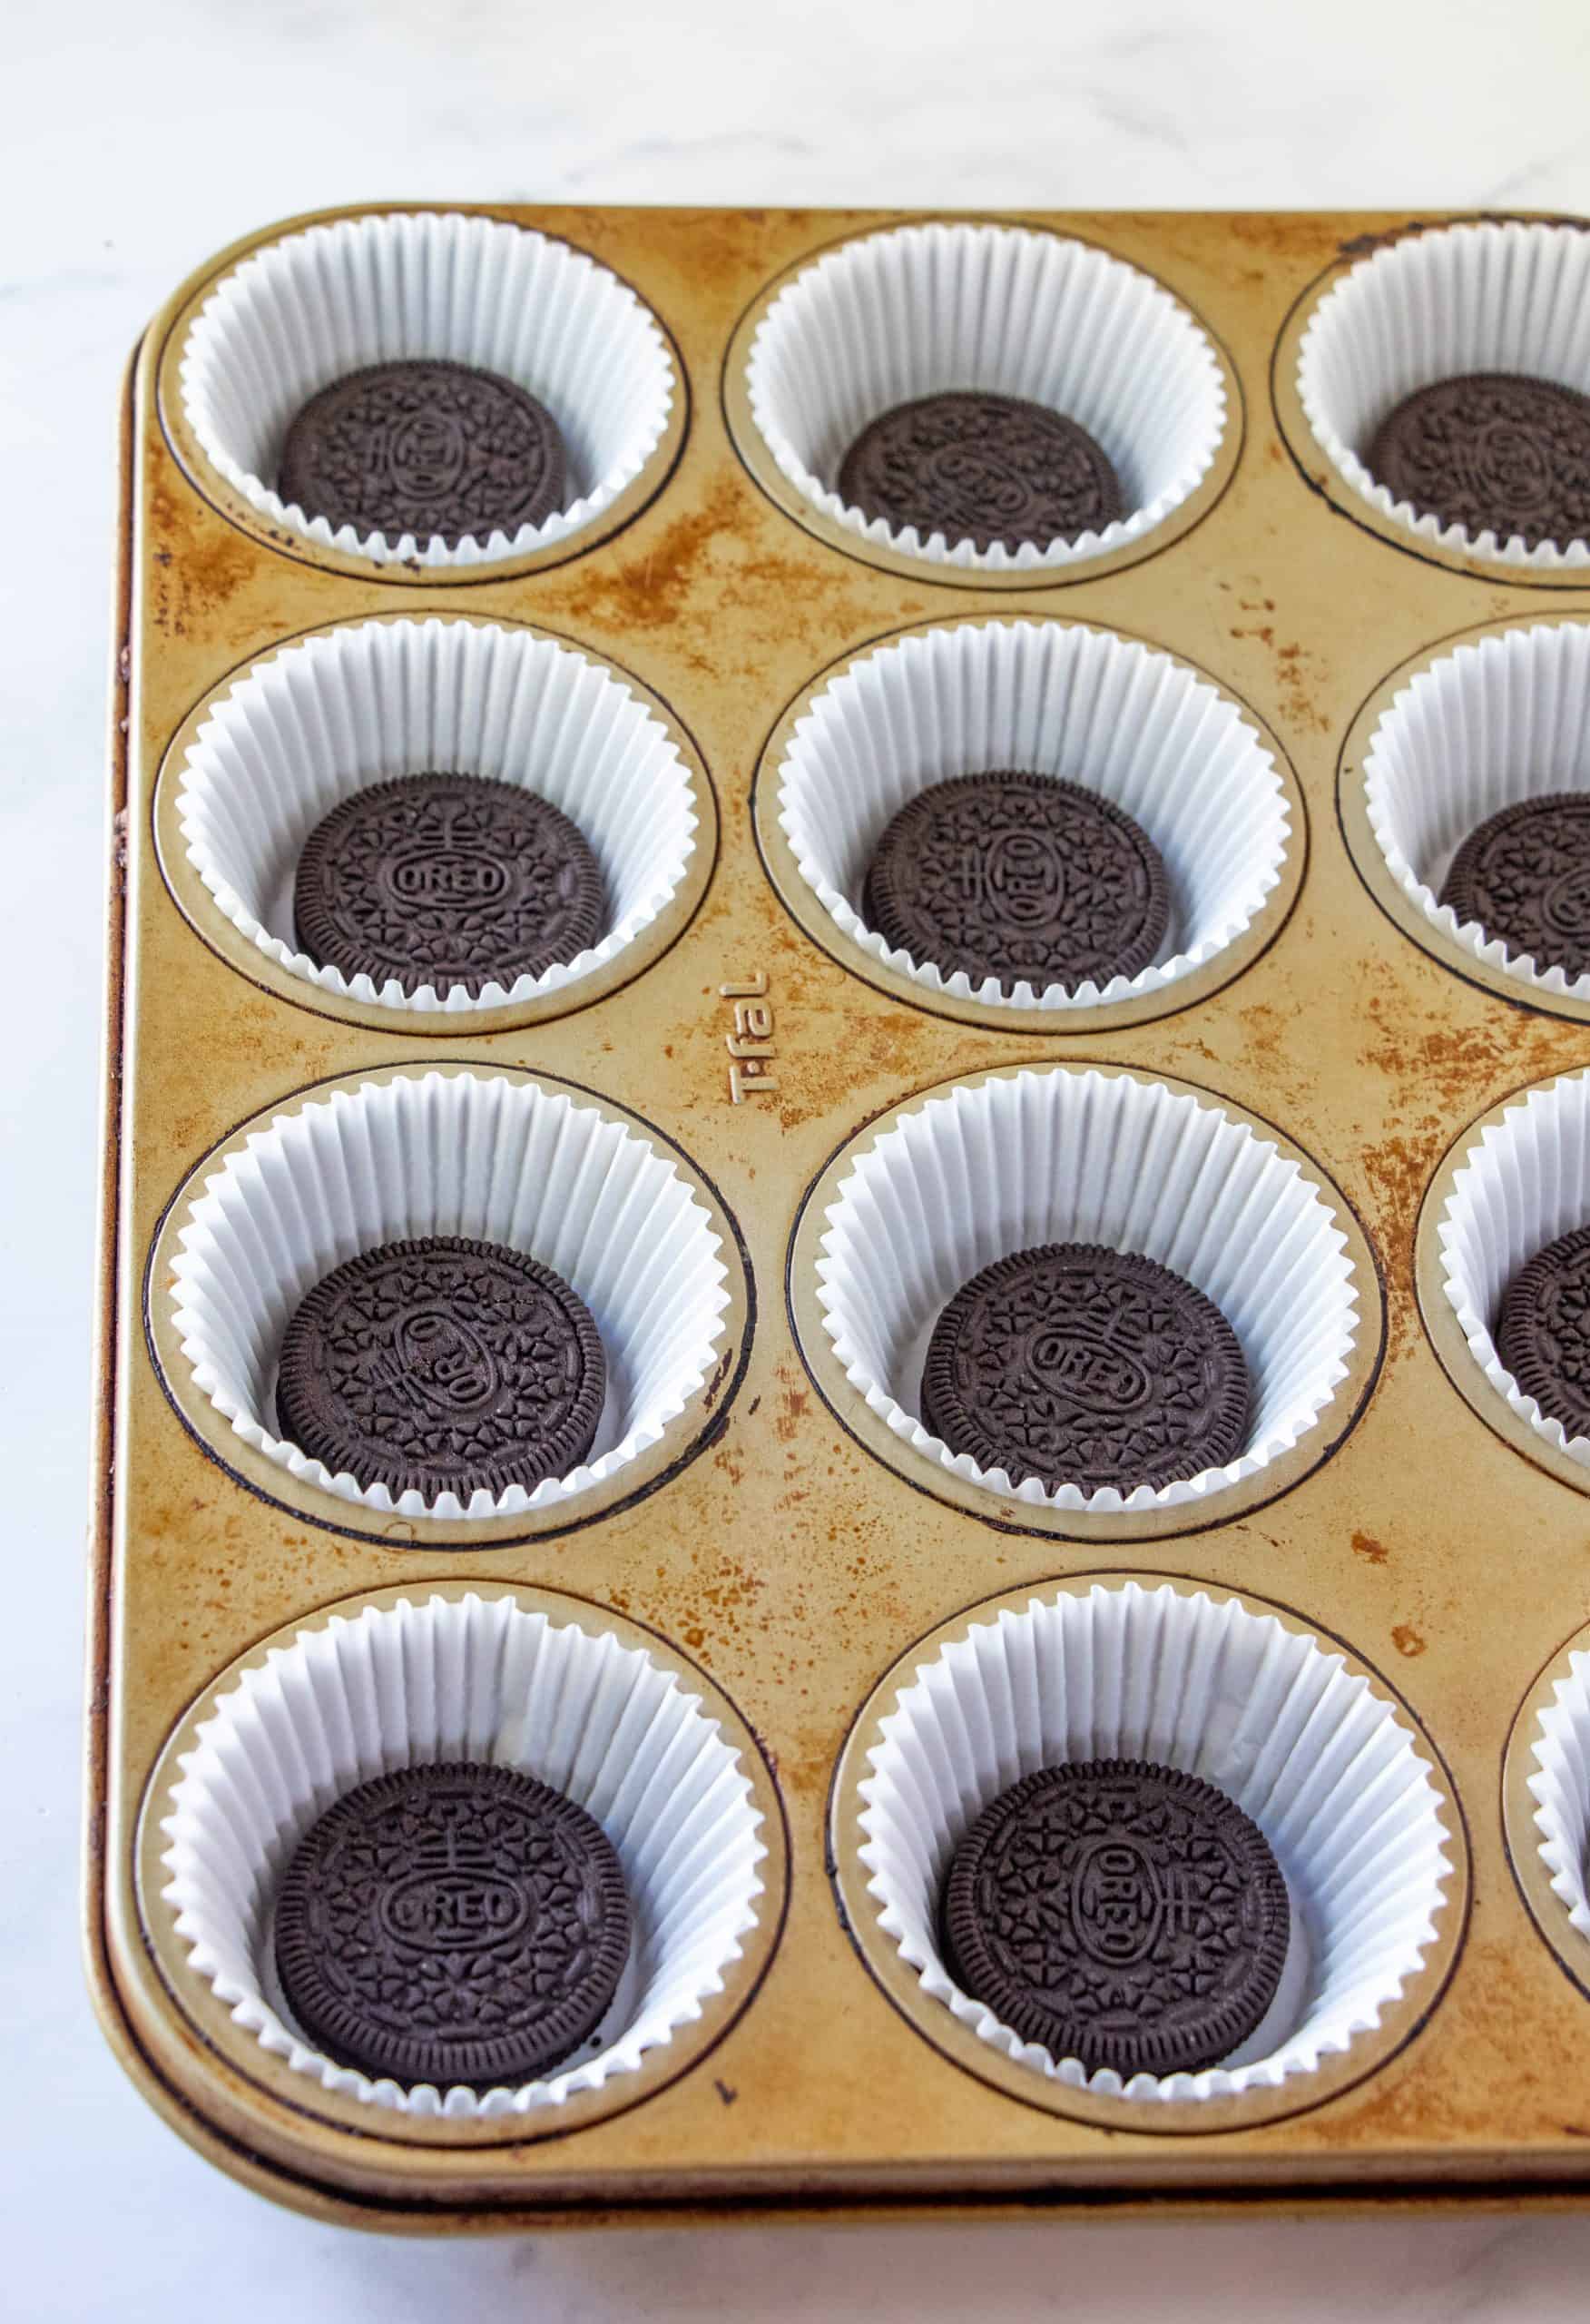 Oreo cookies placed into the bottom of paper cupcake liners in a muffin tin.